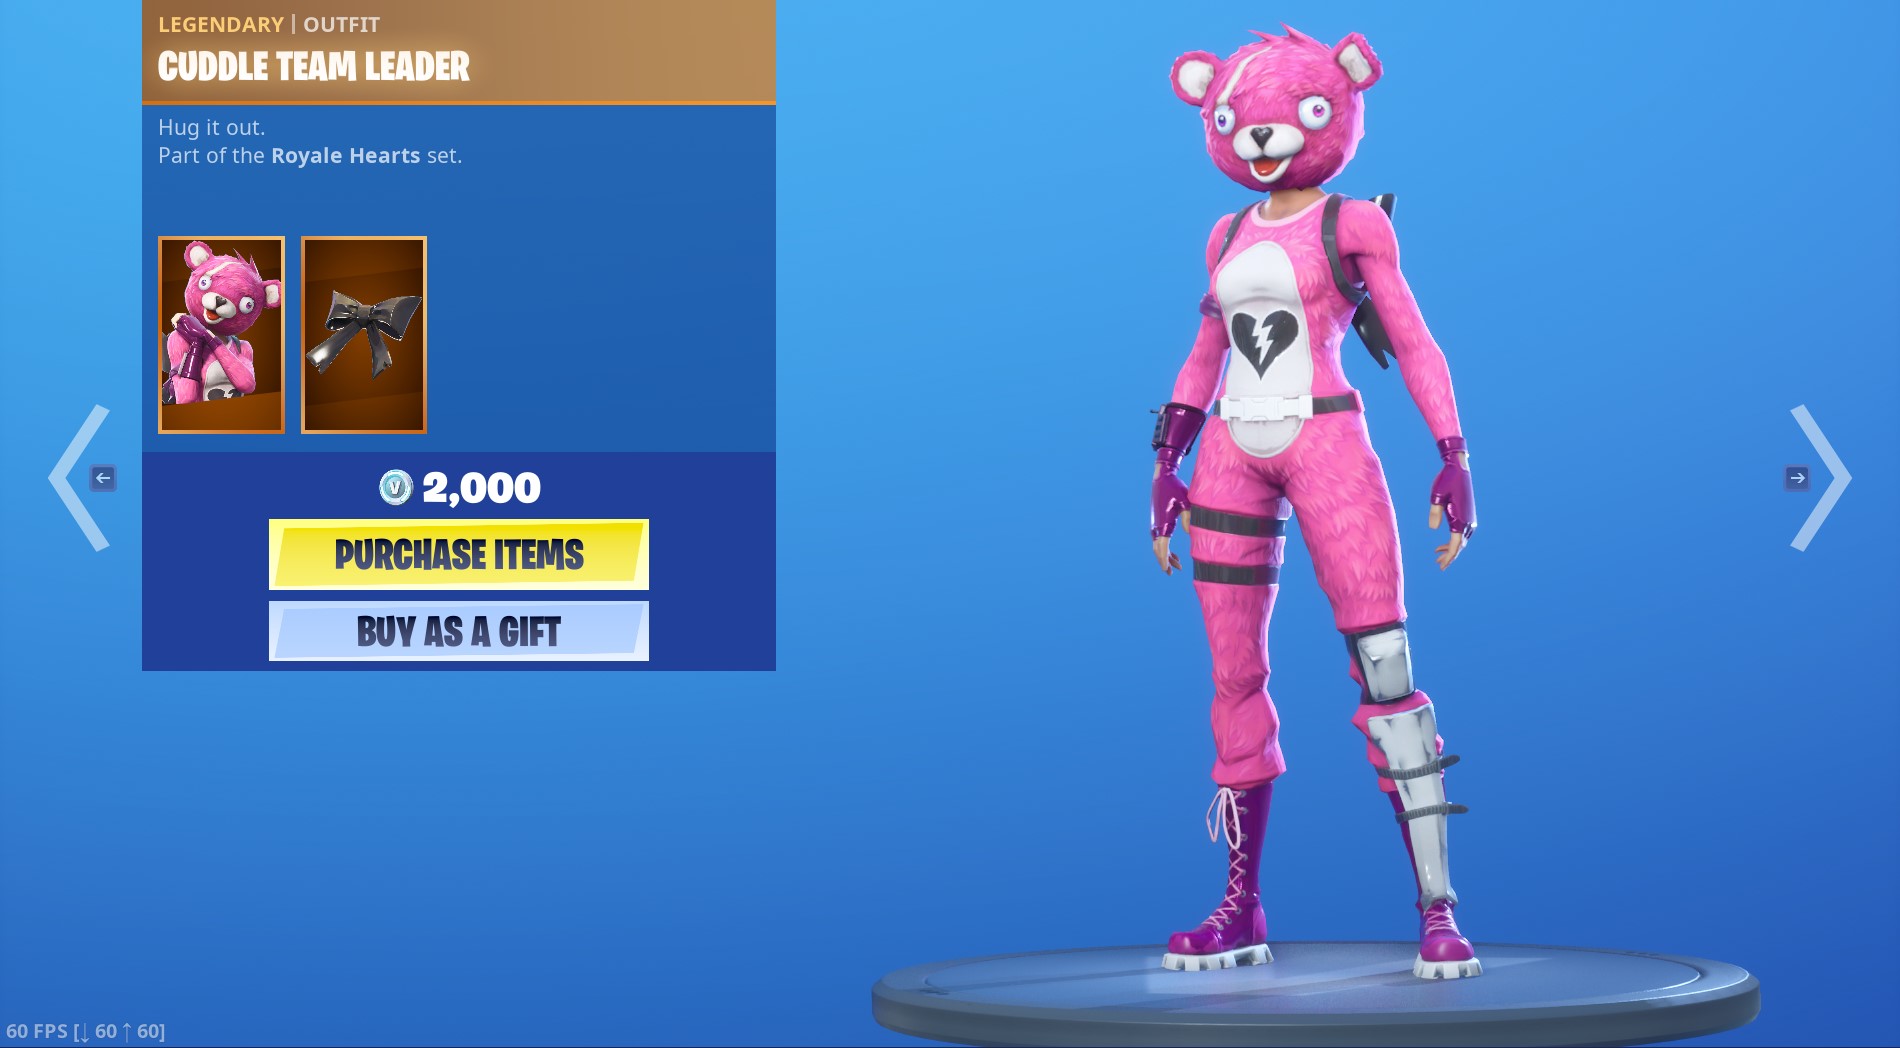 Legendary Cuddle Team Leader Outfit